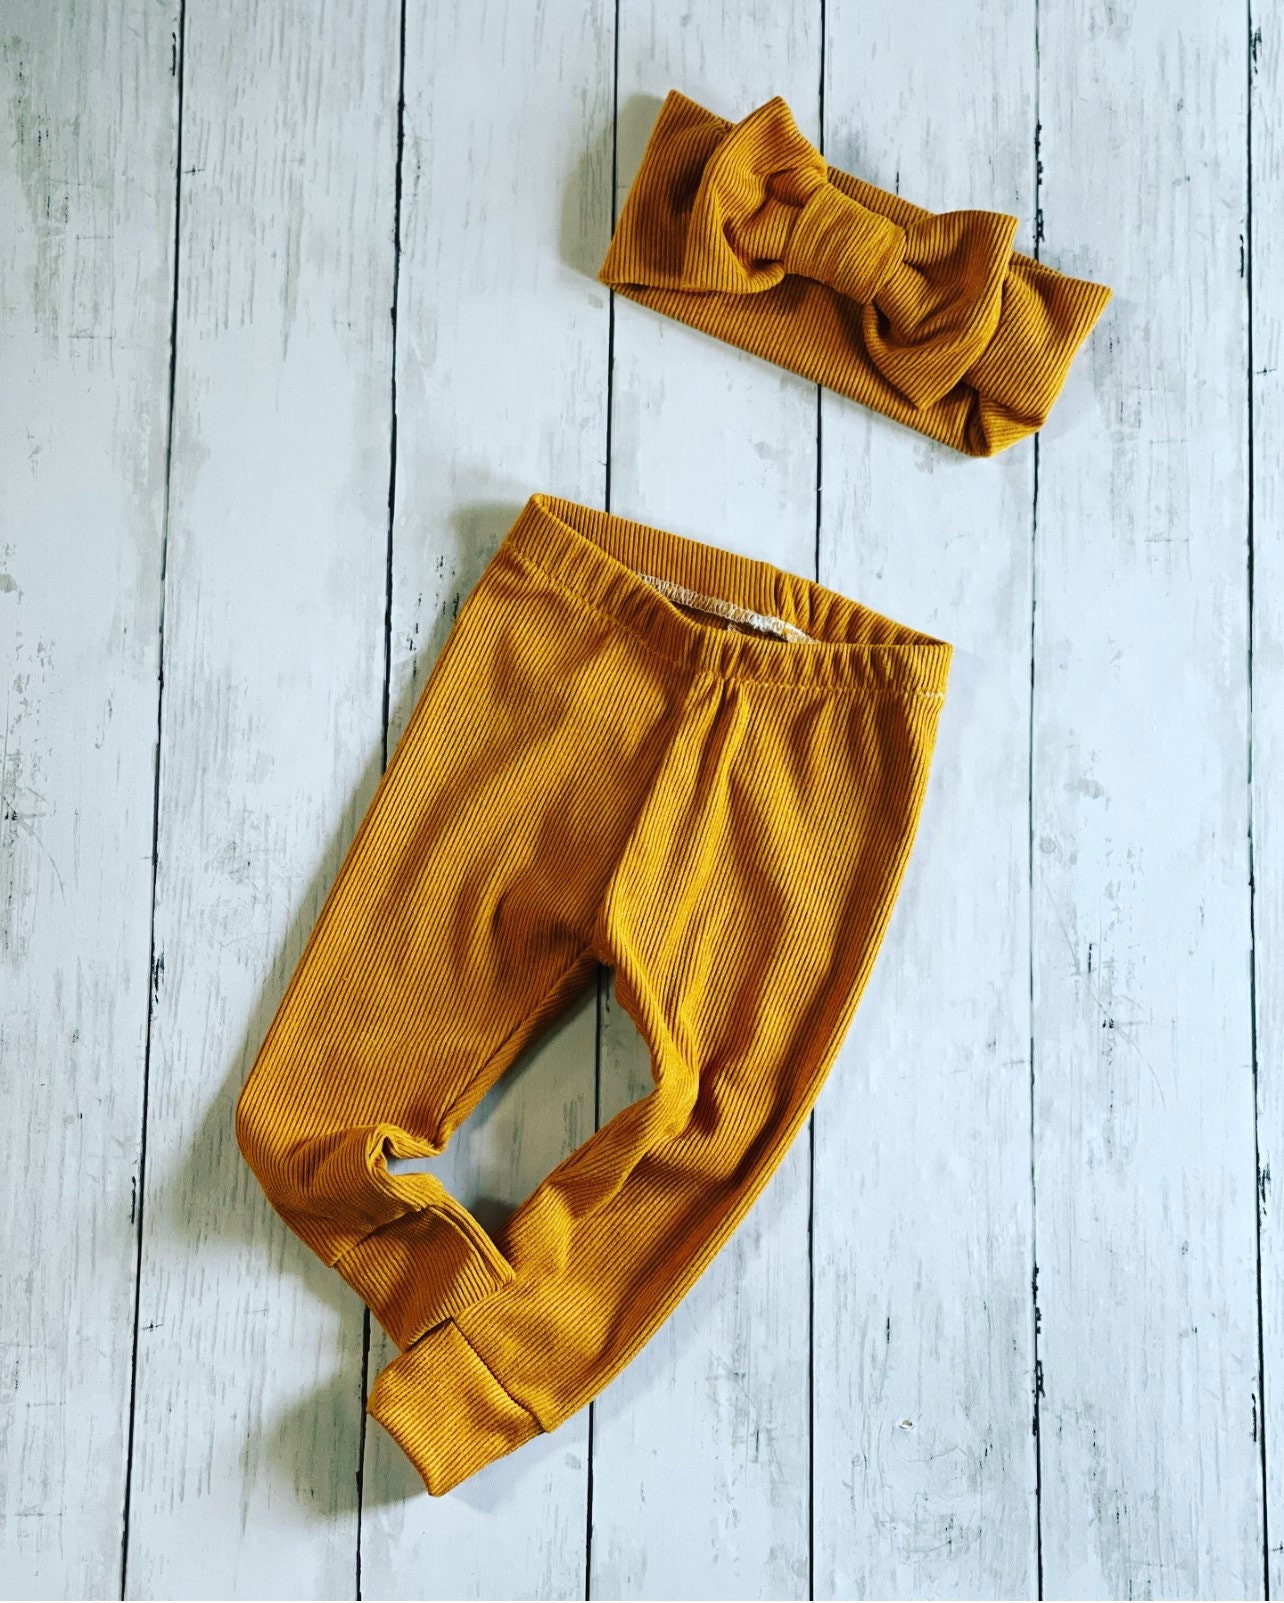 Red Fox Vivid Colored Mustard Yellow Skinny Casual Dress Pants, Super Comfy  Moleton Stretch Jeggings Legging Cotton Yoga Pants for Tall Women